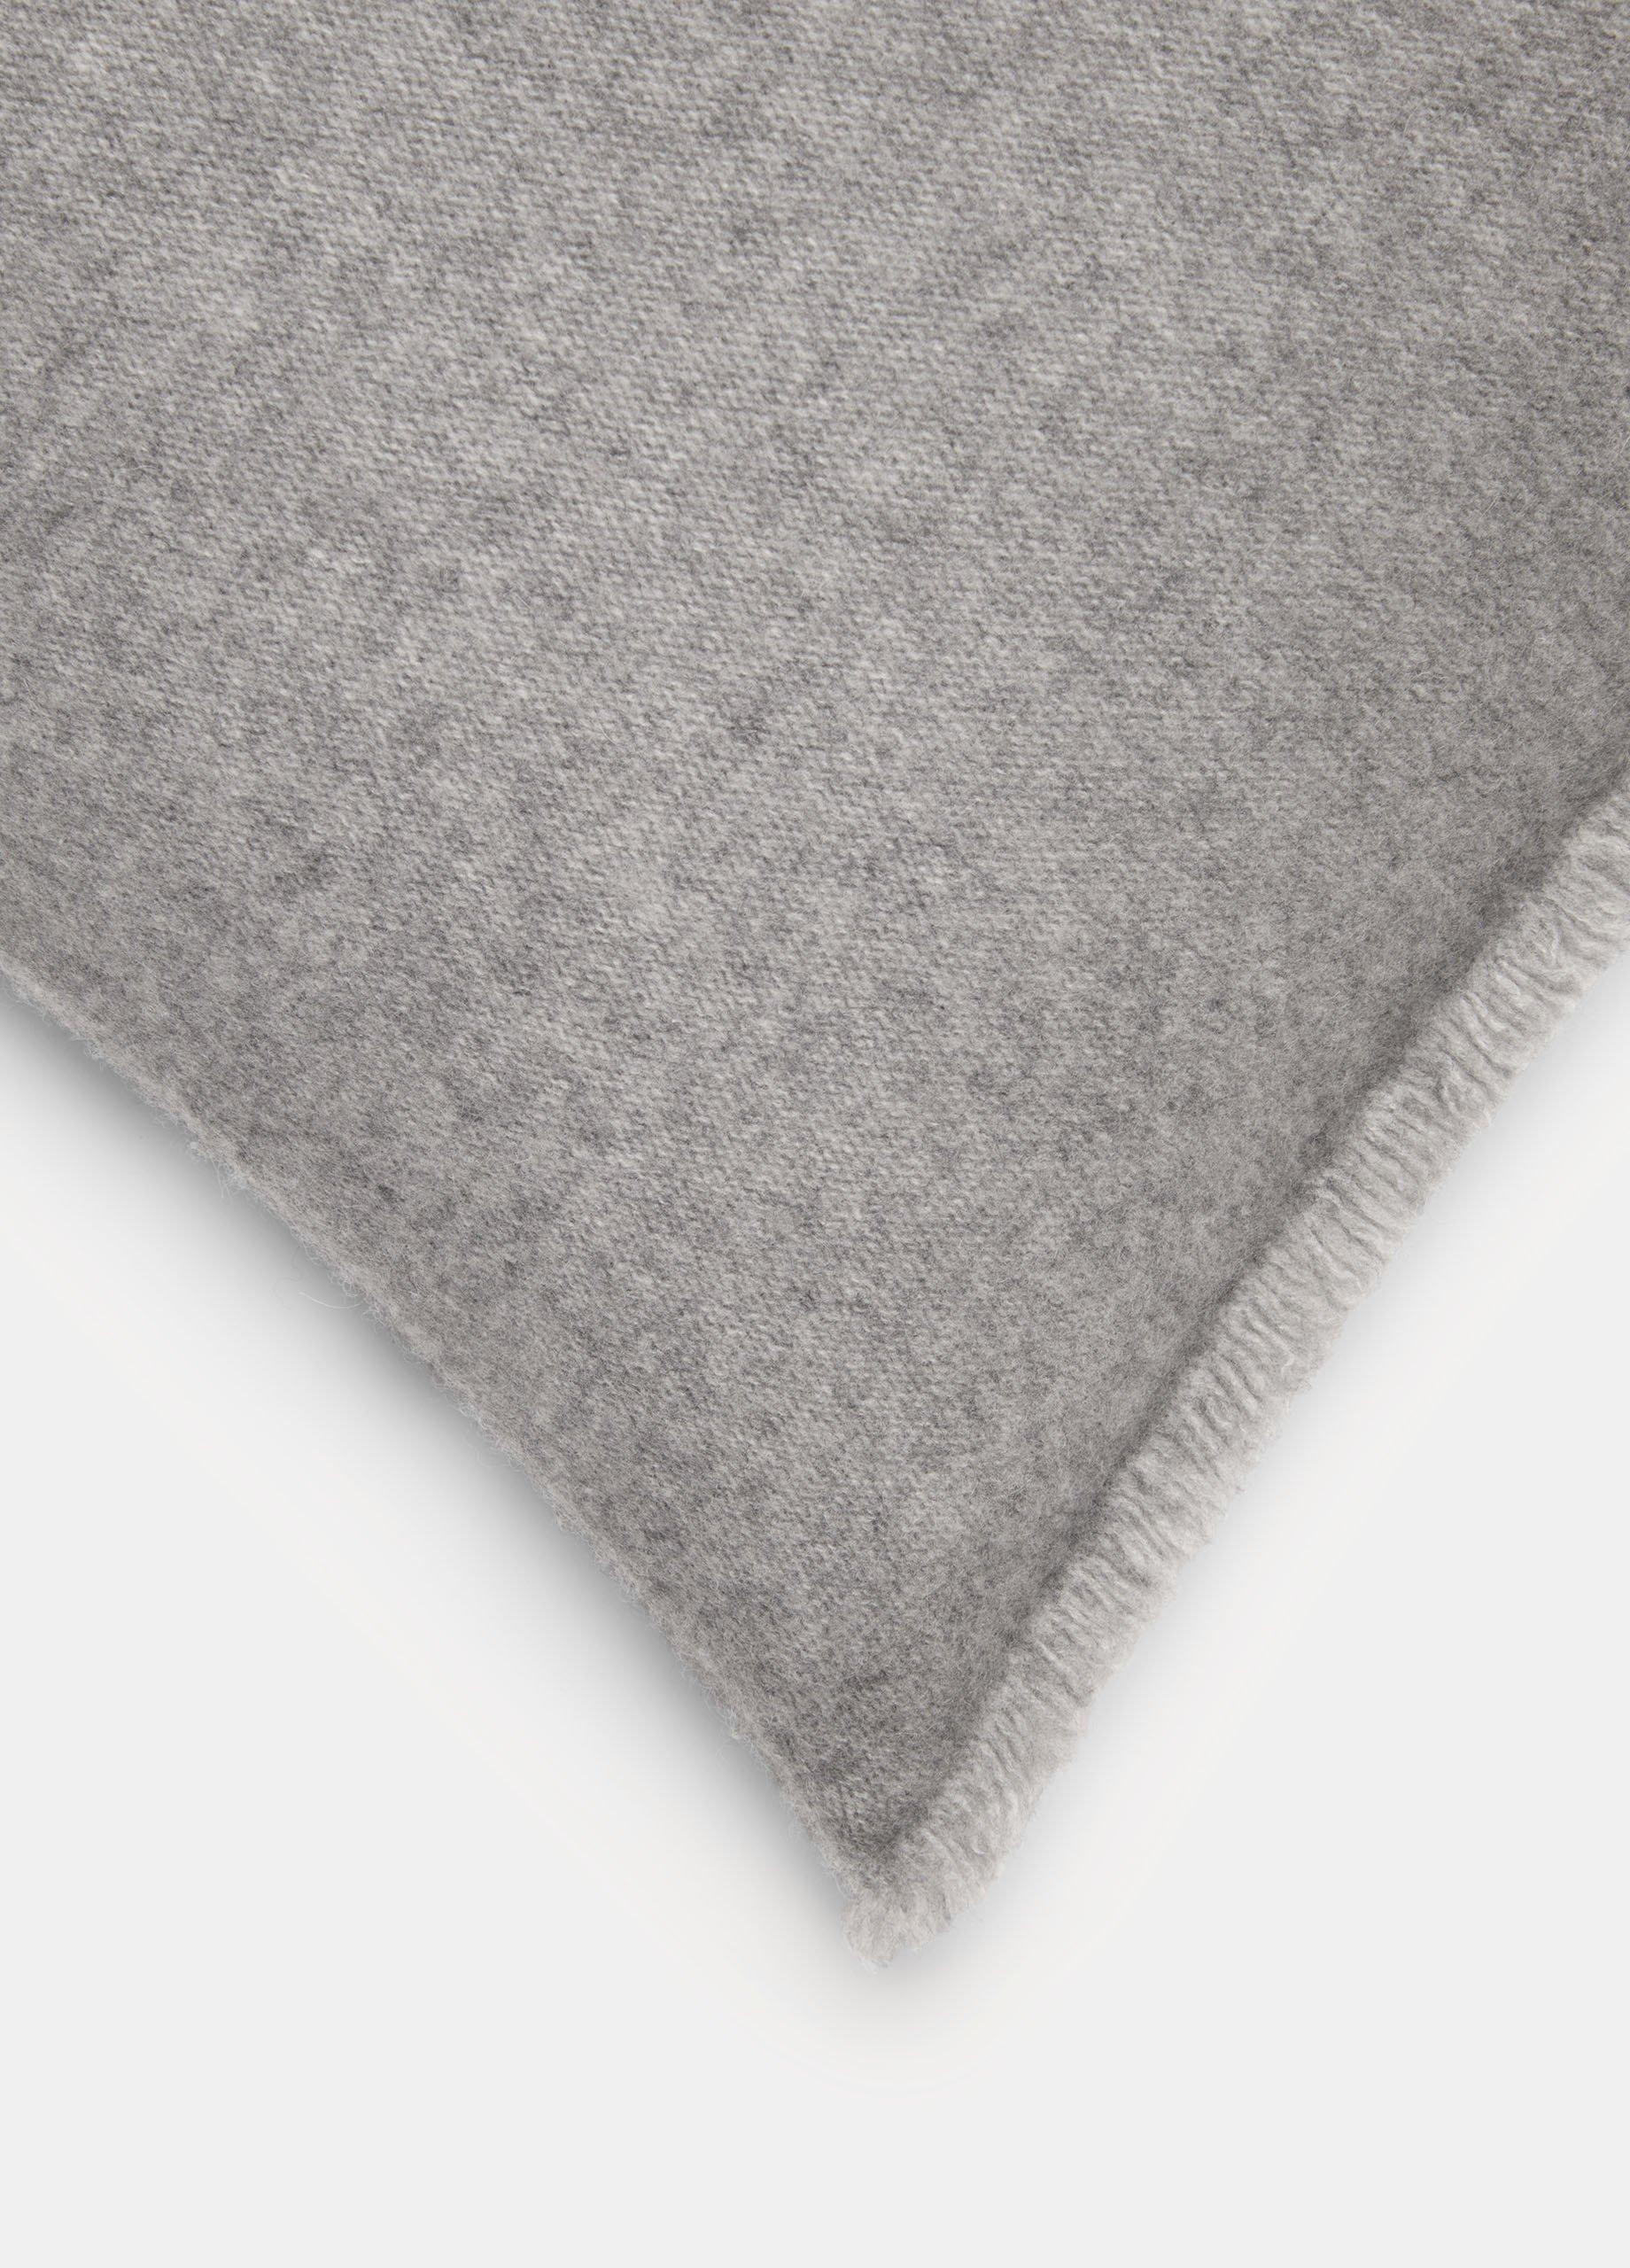 Boiled Cashmere Square Pillow